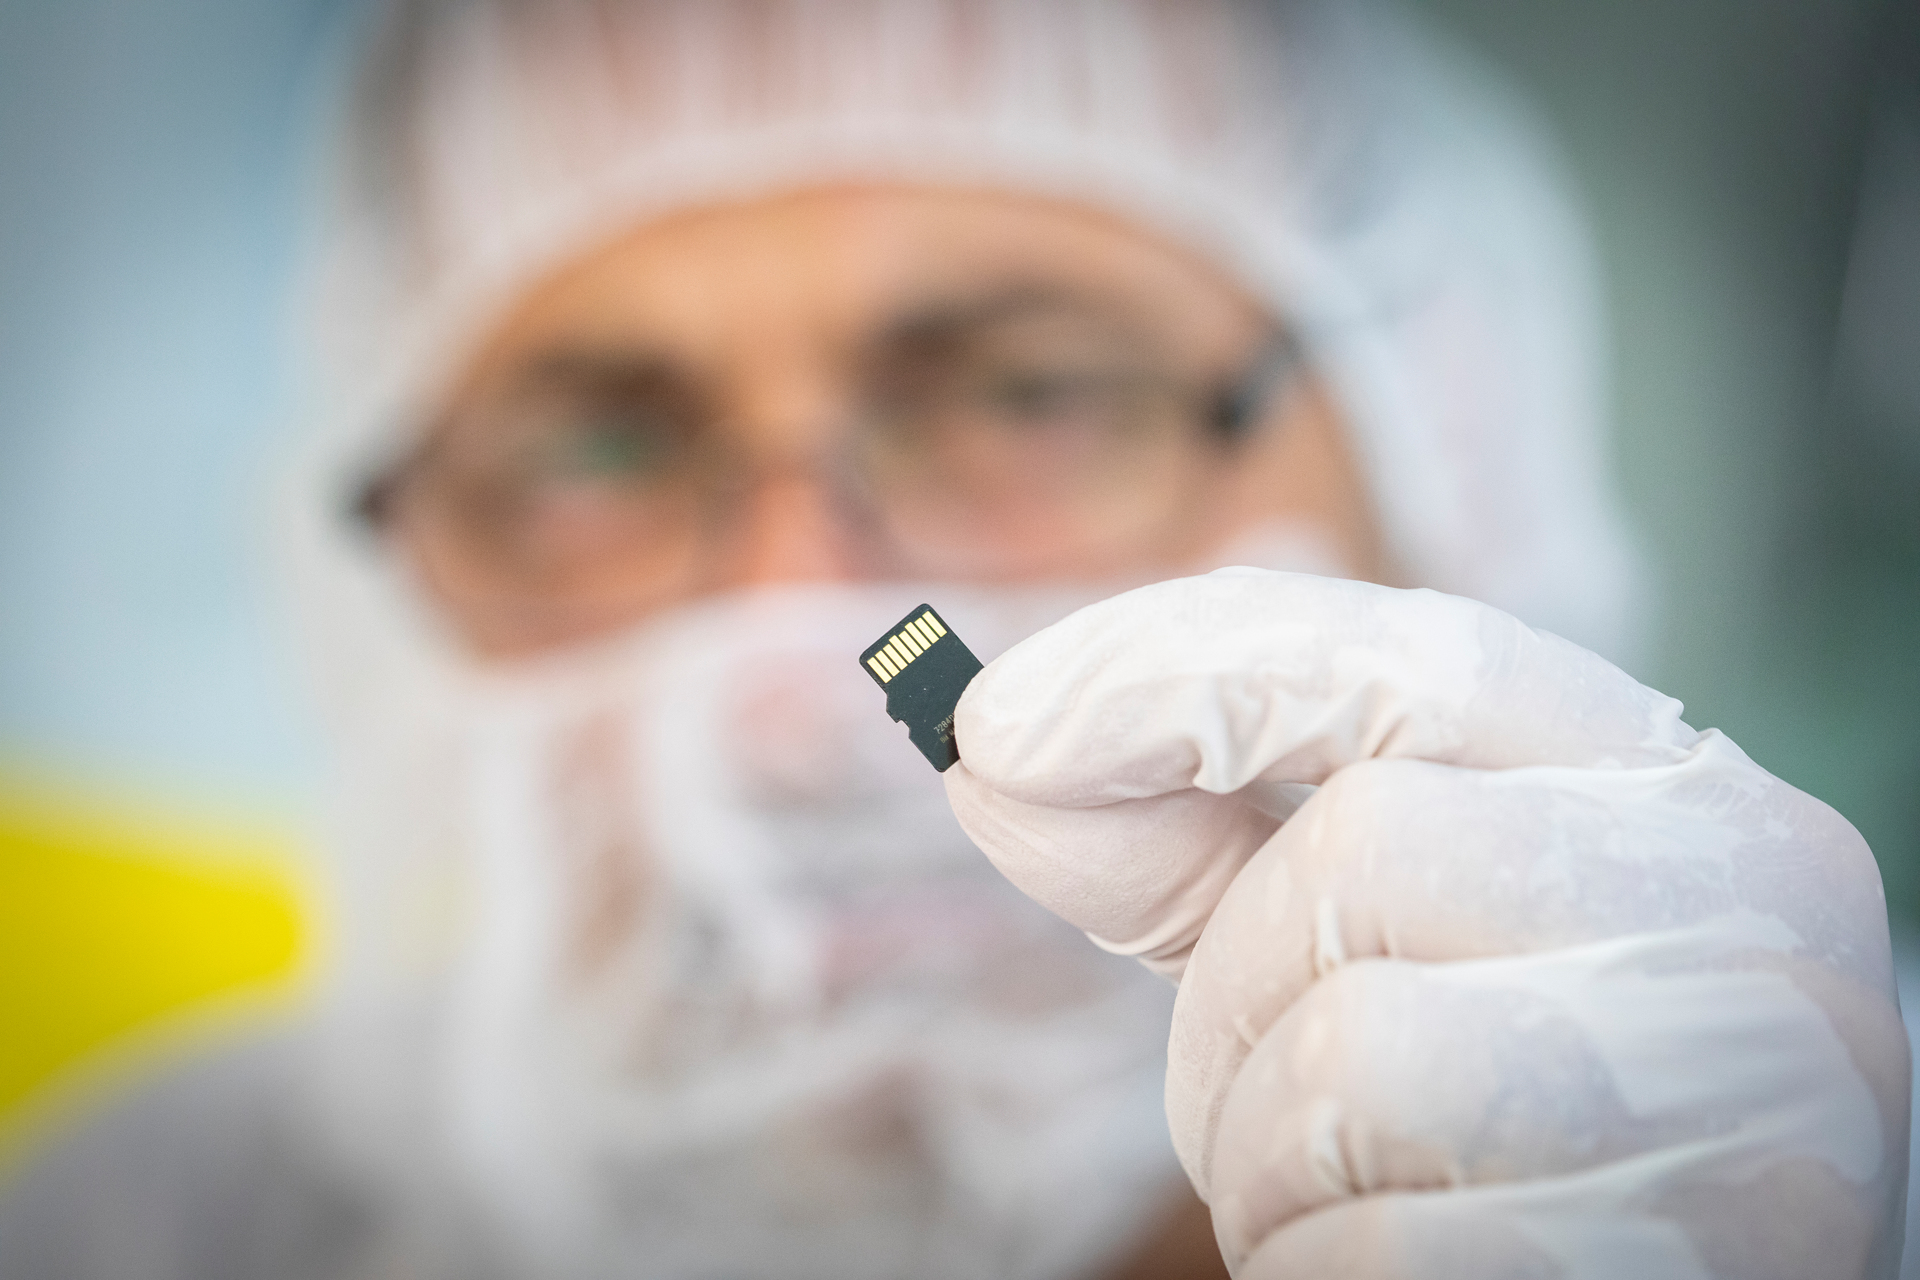 A Parker Solar Probe team member from the Johns Hopkins Applied Physics Laboratory holds the memory card containing 1,137,202 names submitted by the public to travel to the Sun aboard the spacecraft. The card was installed on a plaque which was placed on the spacecraft on May 18, 2018, at Astrotech Space Operations in Titusville, Florida. The plaque dedicated the mission to Eugene Parker, who first theorized the existence of the solar wind. Parker Solar Probe is the first NASA mission to be named for a living person.